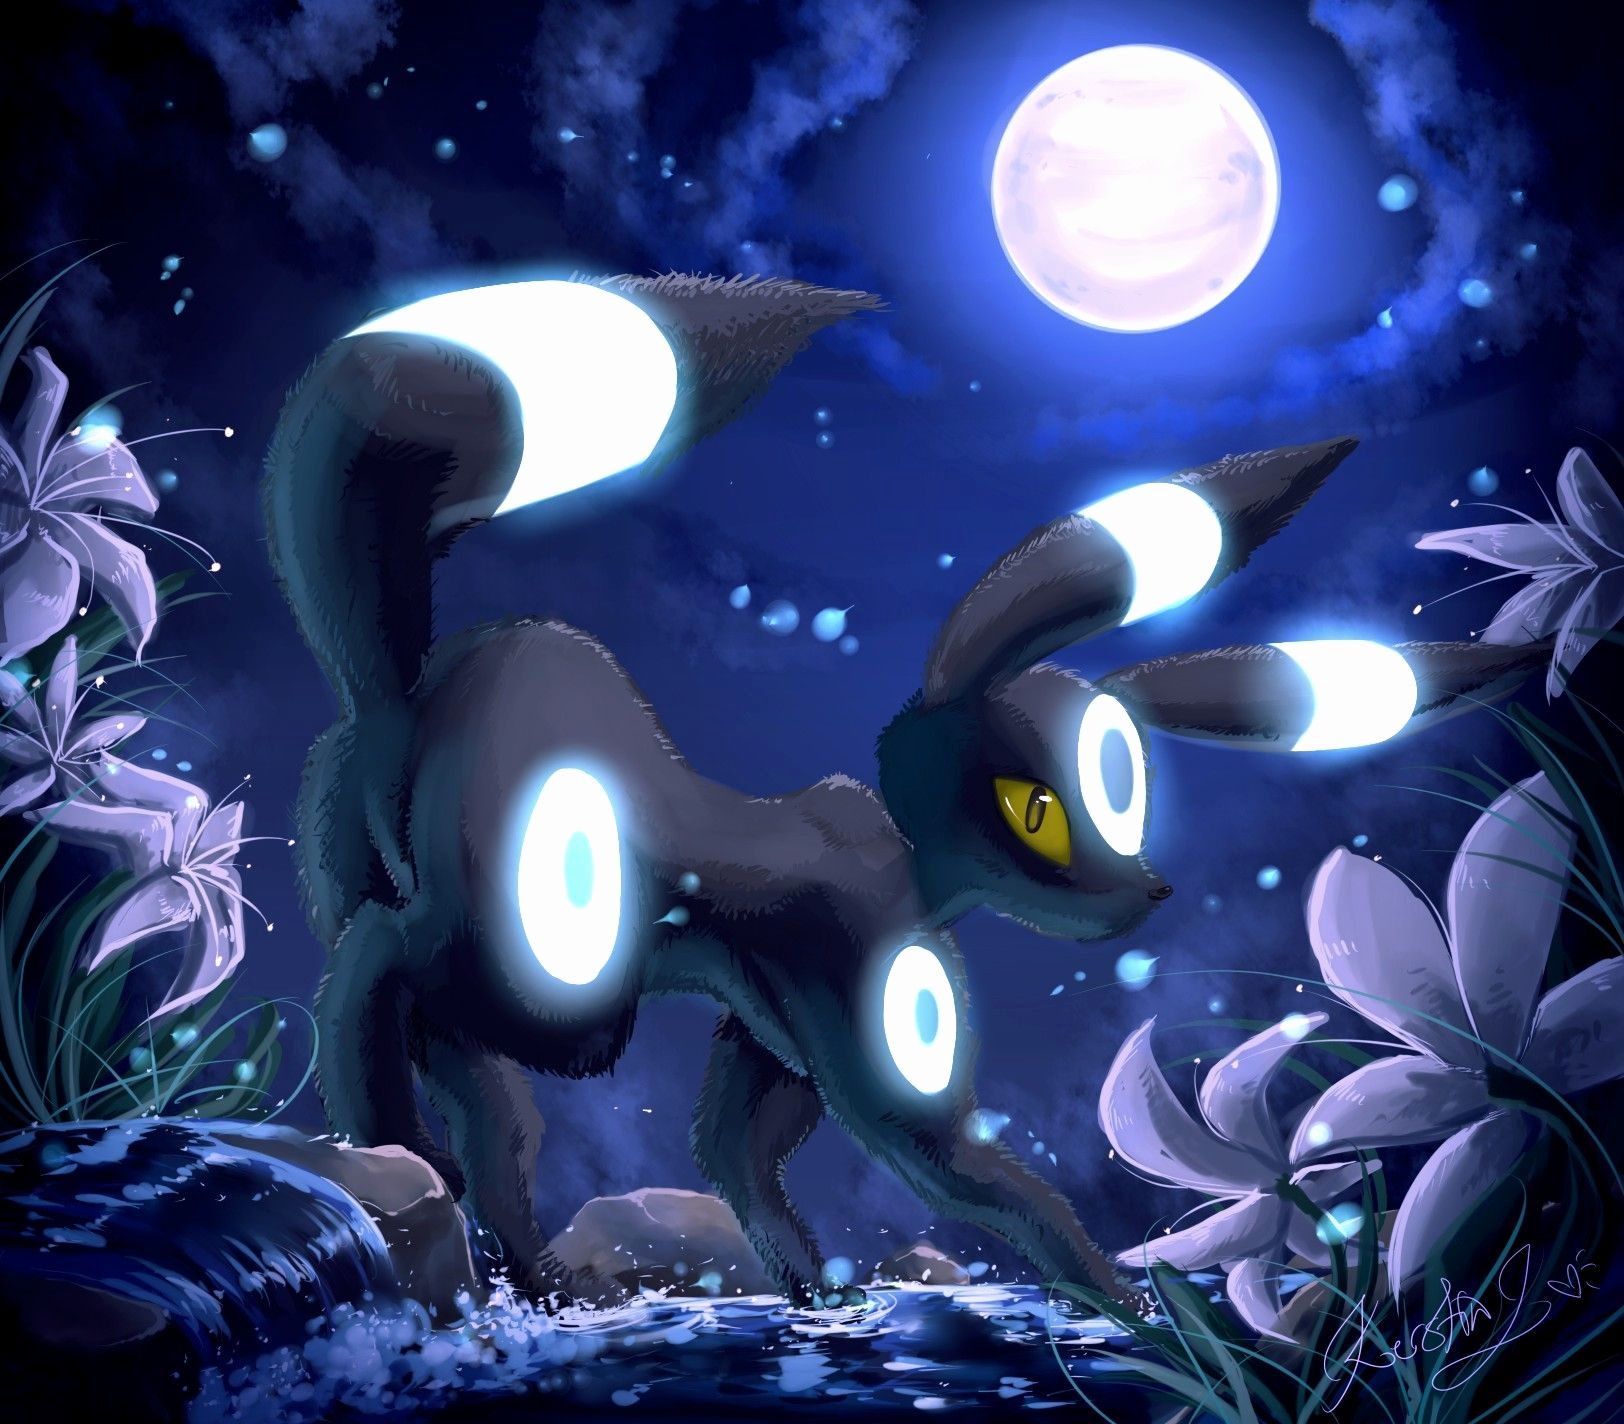 Shiny Pokemon Wallpaper Luxury Umbreon HD Wallpaper Of the Day of The Hudson